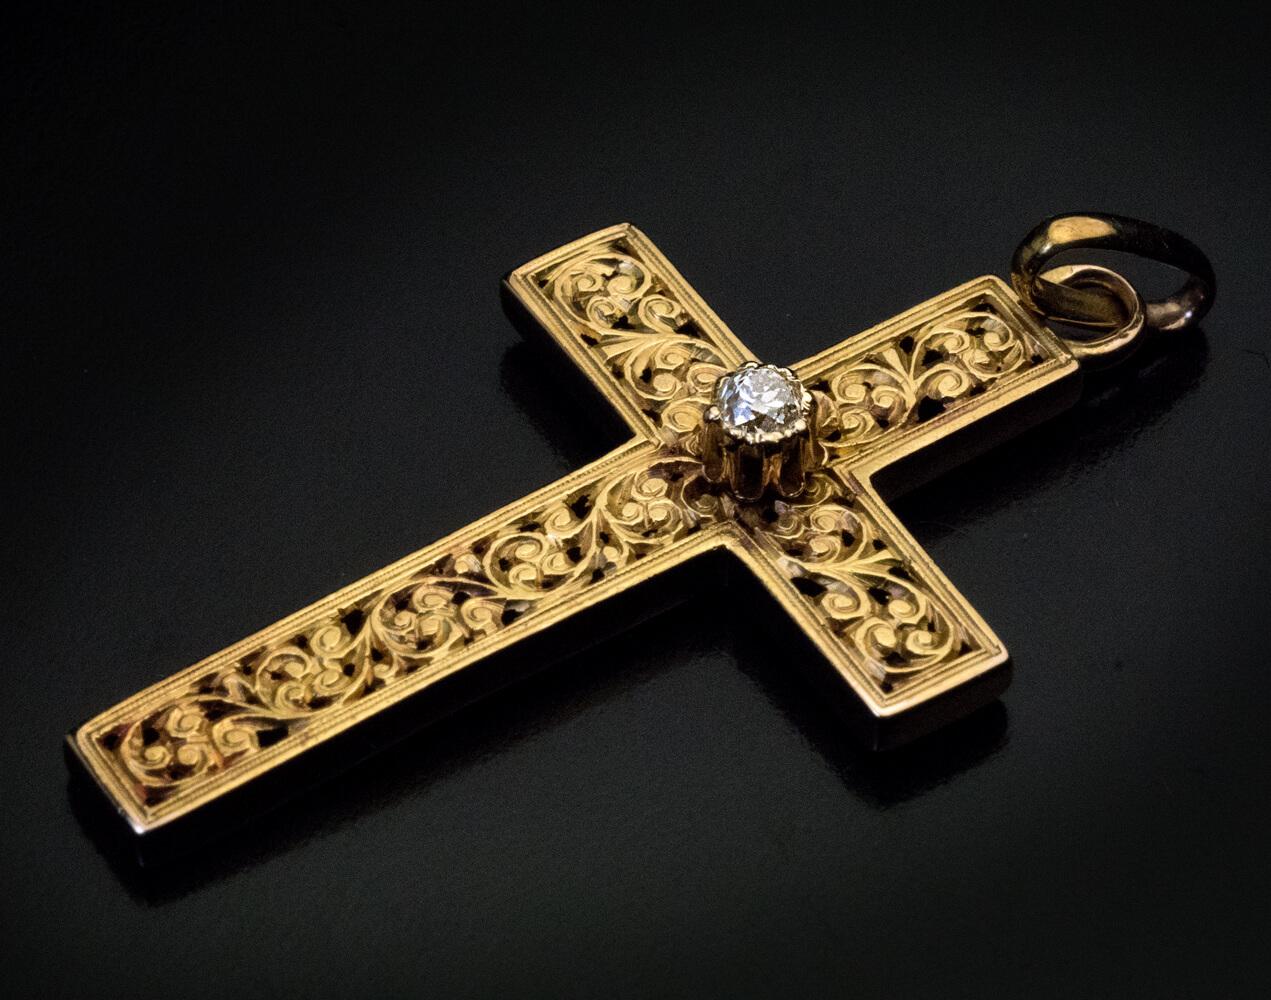 Circa 1880

The 14K gold cross is finely carved with a medieval style scrolling floral design and centered with a sparkling old mine cut diamond (approximately 0.10 ct)

Total length of the cross with suspension ring is 40 mm (1 5/8 in.), width is